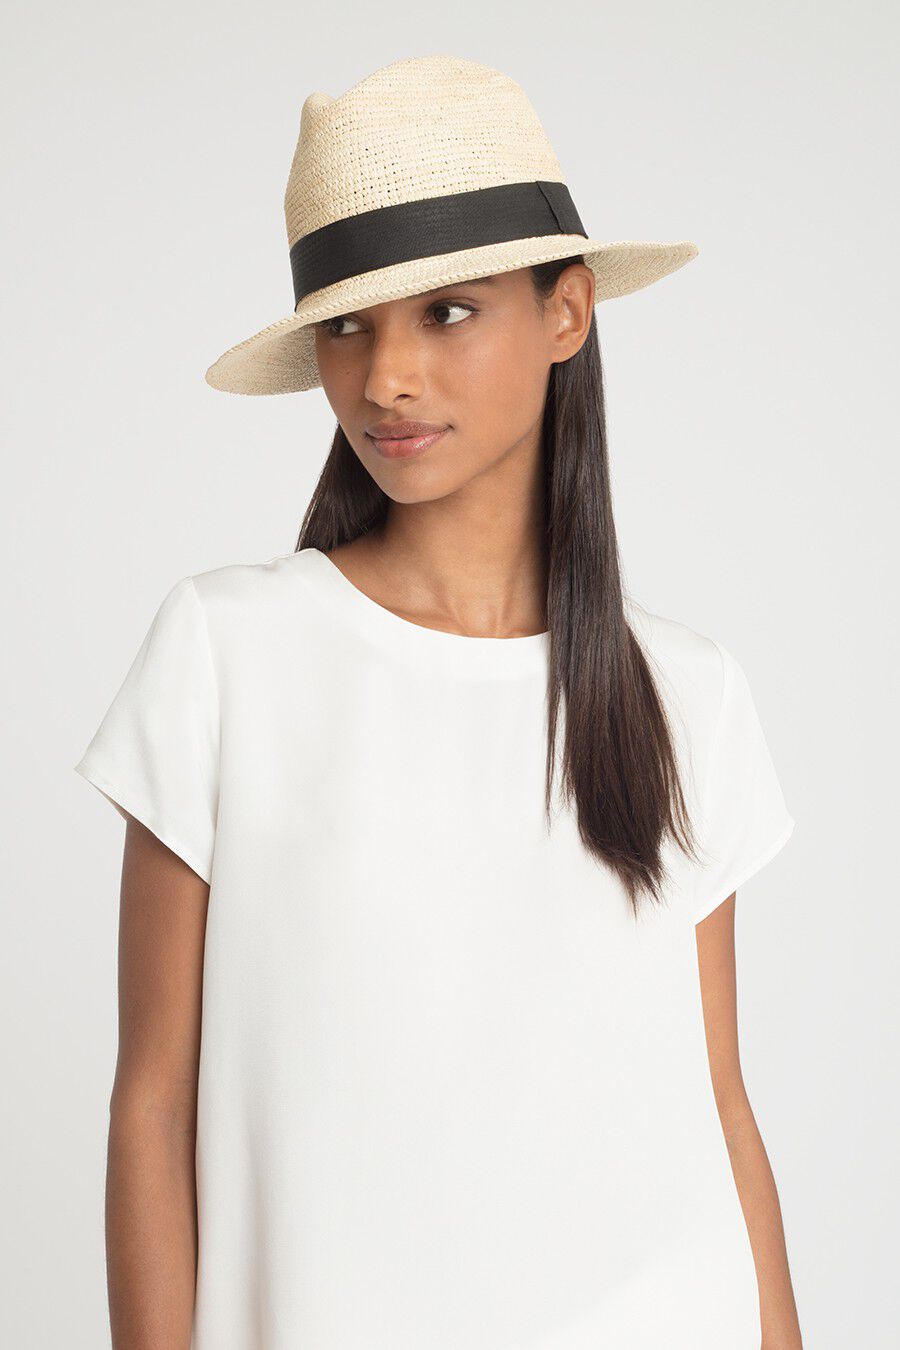 Woman wearing a hat and a top, looking to the side.